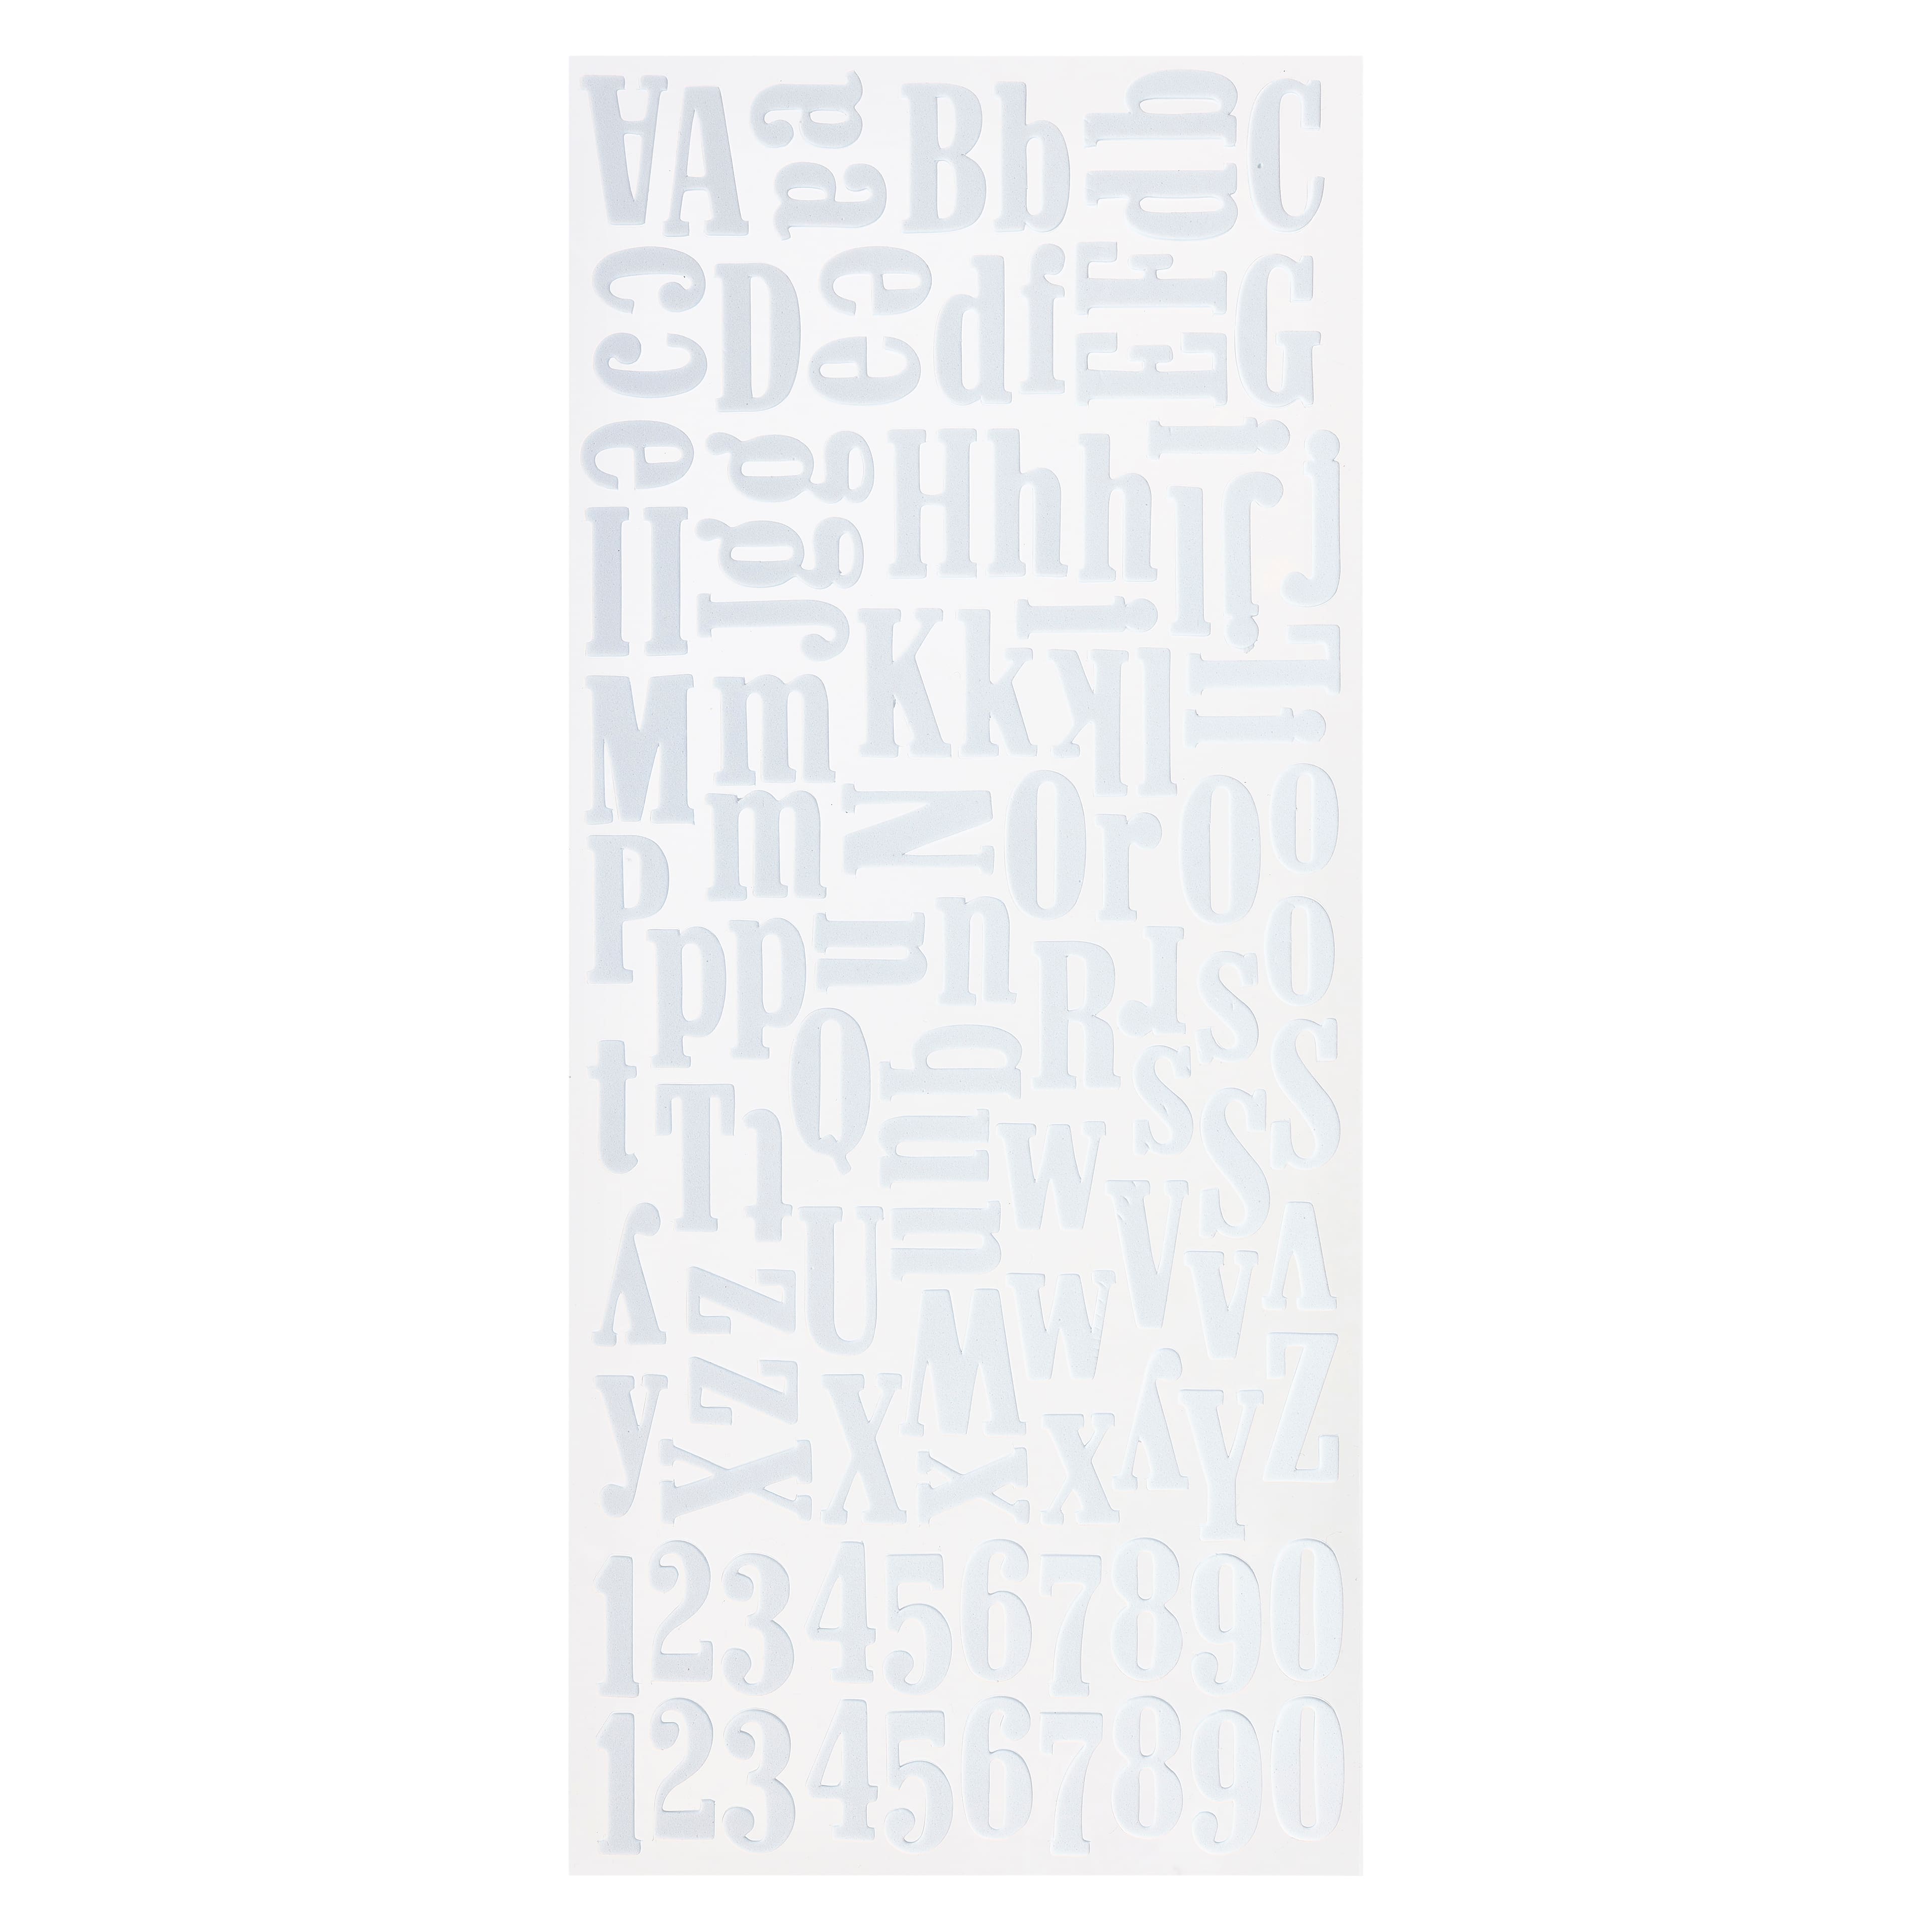 12 Packs: 104 ct. (1,248 total) Large White Alphabet Foam Stickers